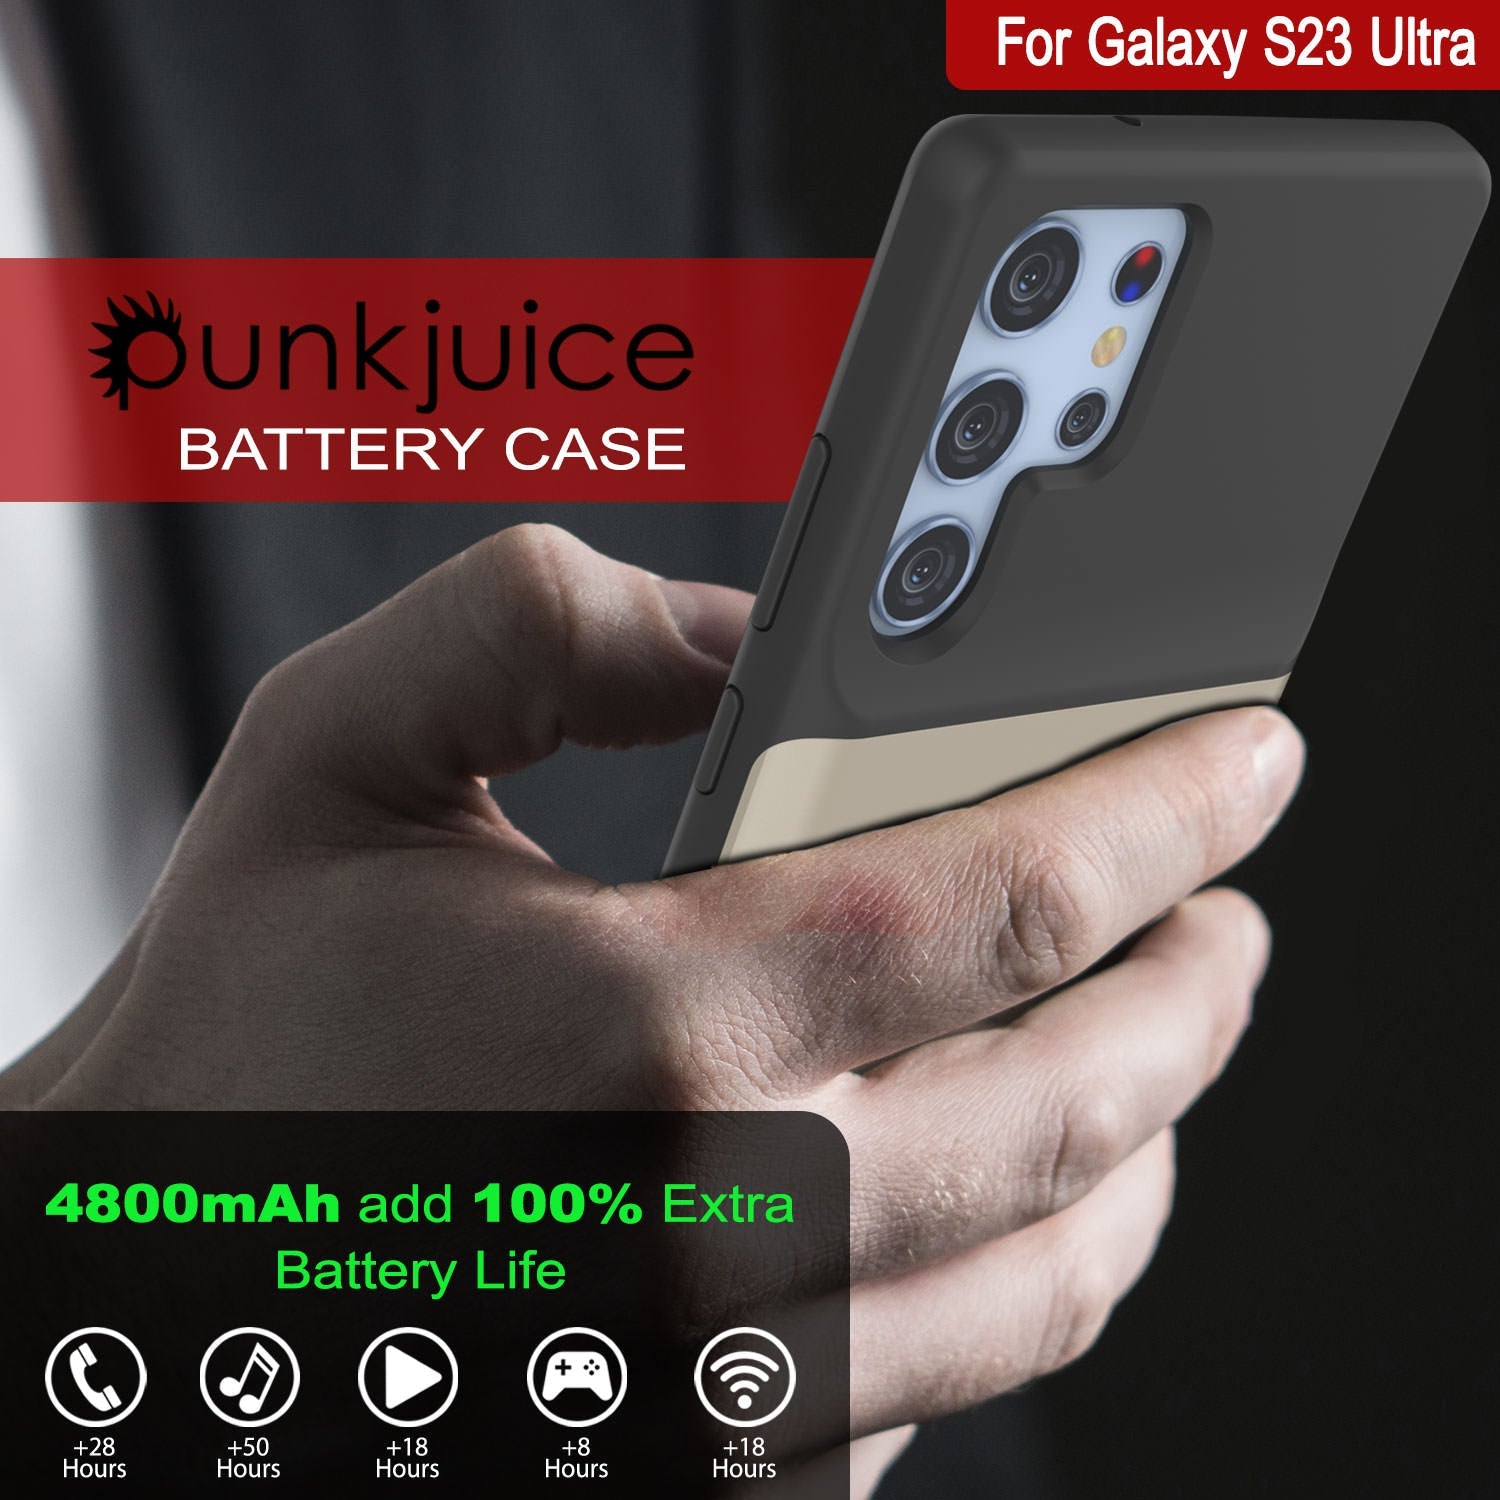 PunkJuice S23 Ultra Battery Case Silver - Portable Charging Power Juice Bank with 4800mAh